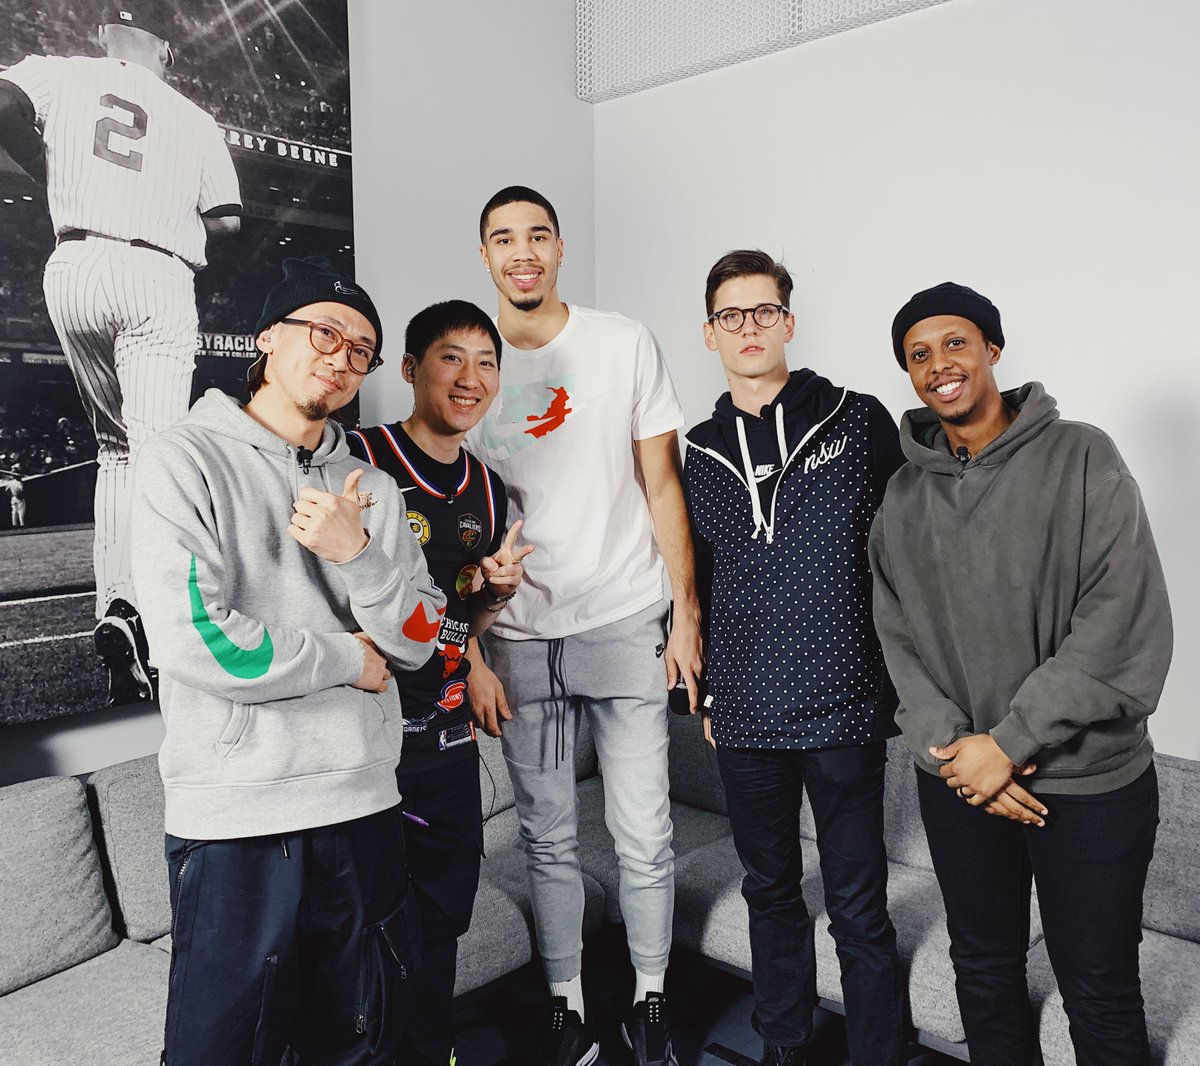 The FreshStock crew hosted a special episode from @Nike's New York City HQ to celebrate the debut of the Adapt BB shoes on Twitch. The power-lacing adds +5 to dexterity.